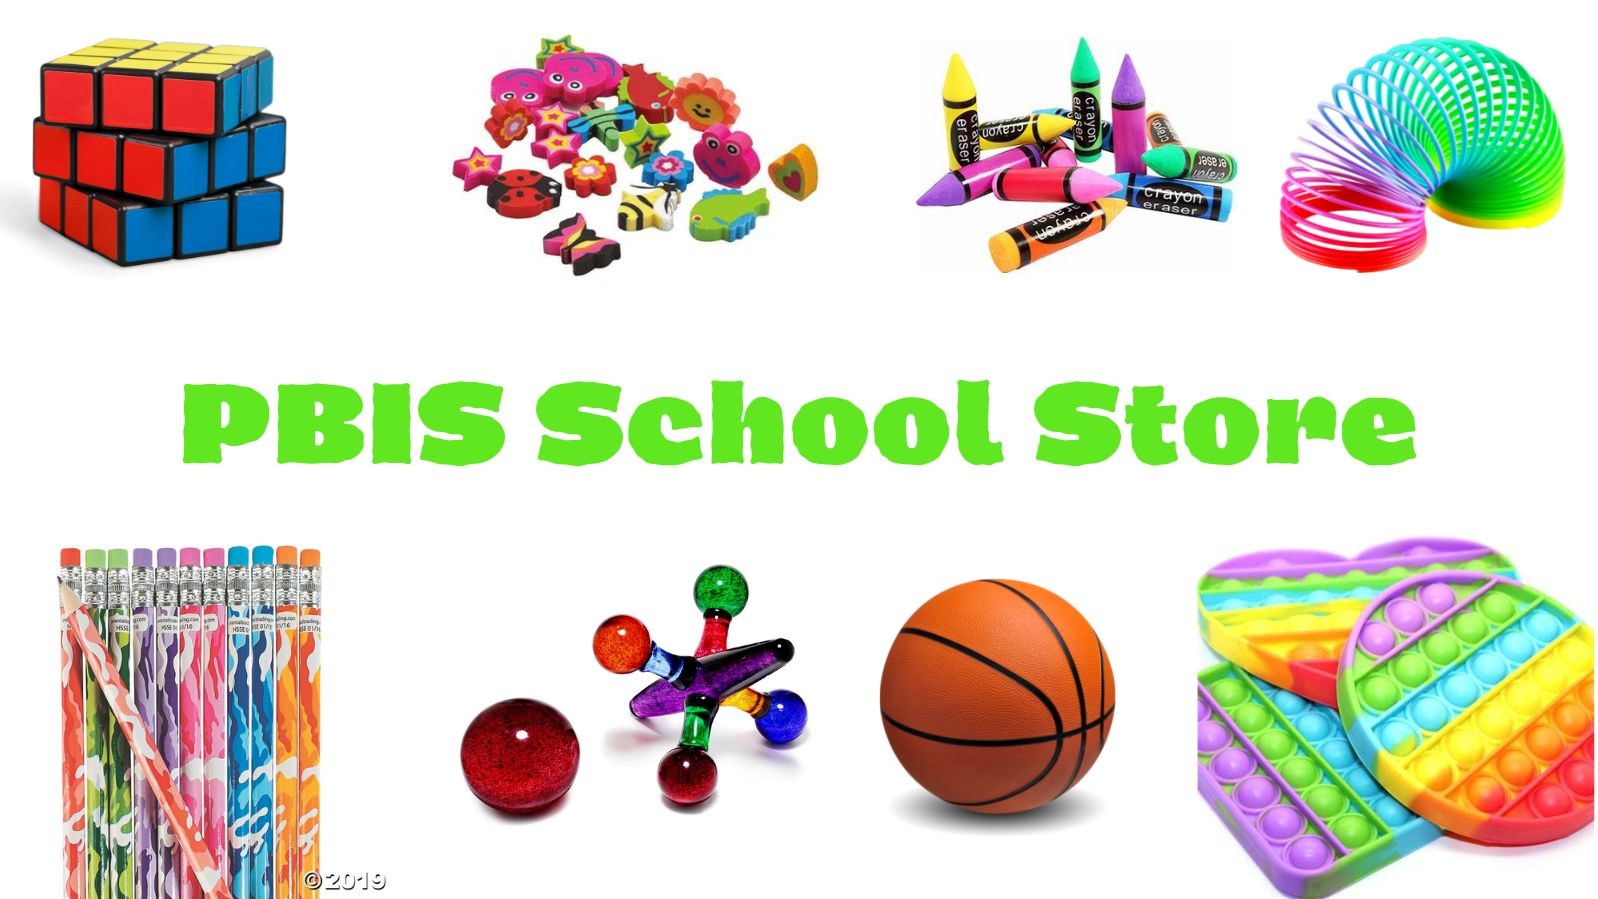 PBIS School Store in green letters surrounded by pics of school supplies, a ball, rubix cube, slinky, jacks, pop its,